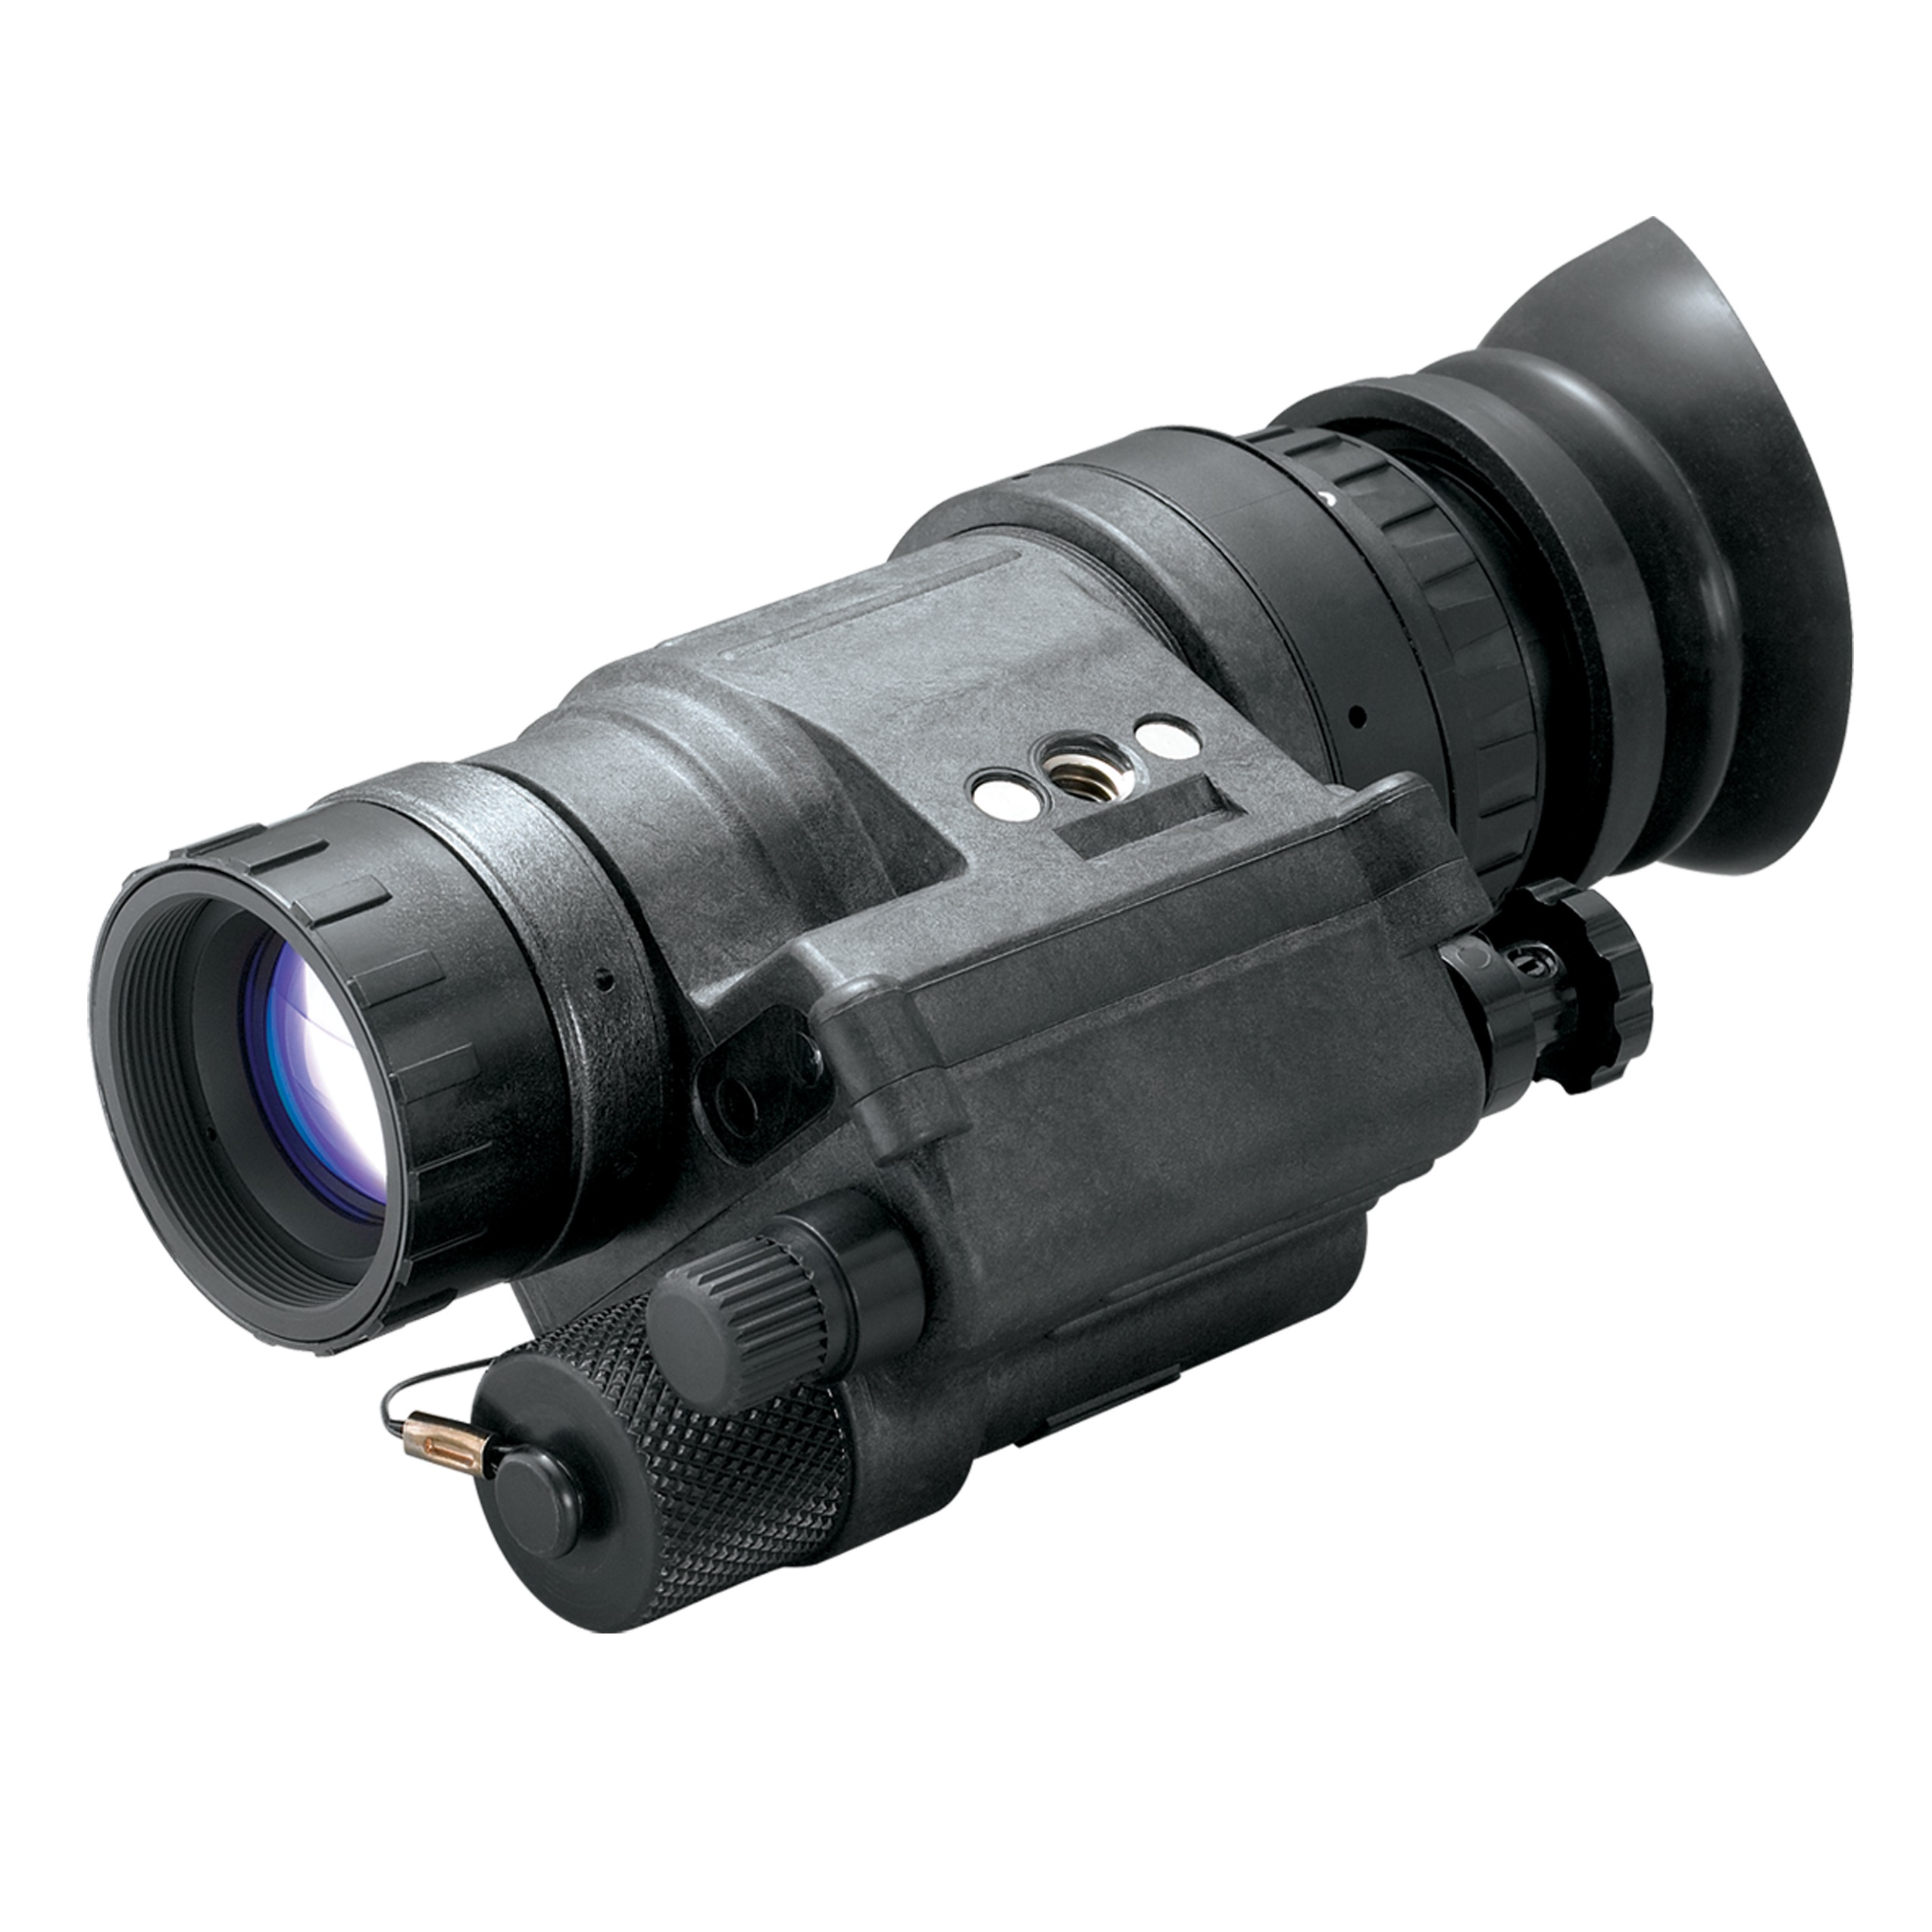 Global Night Vision Devices Market 2019 by Manufacturers'